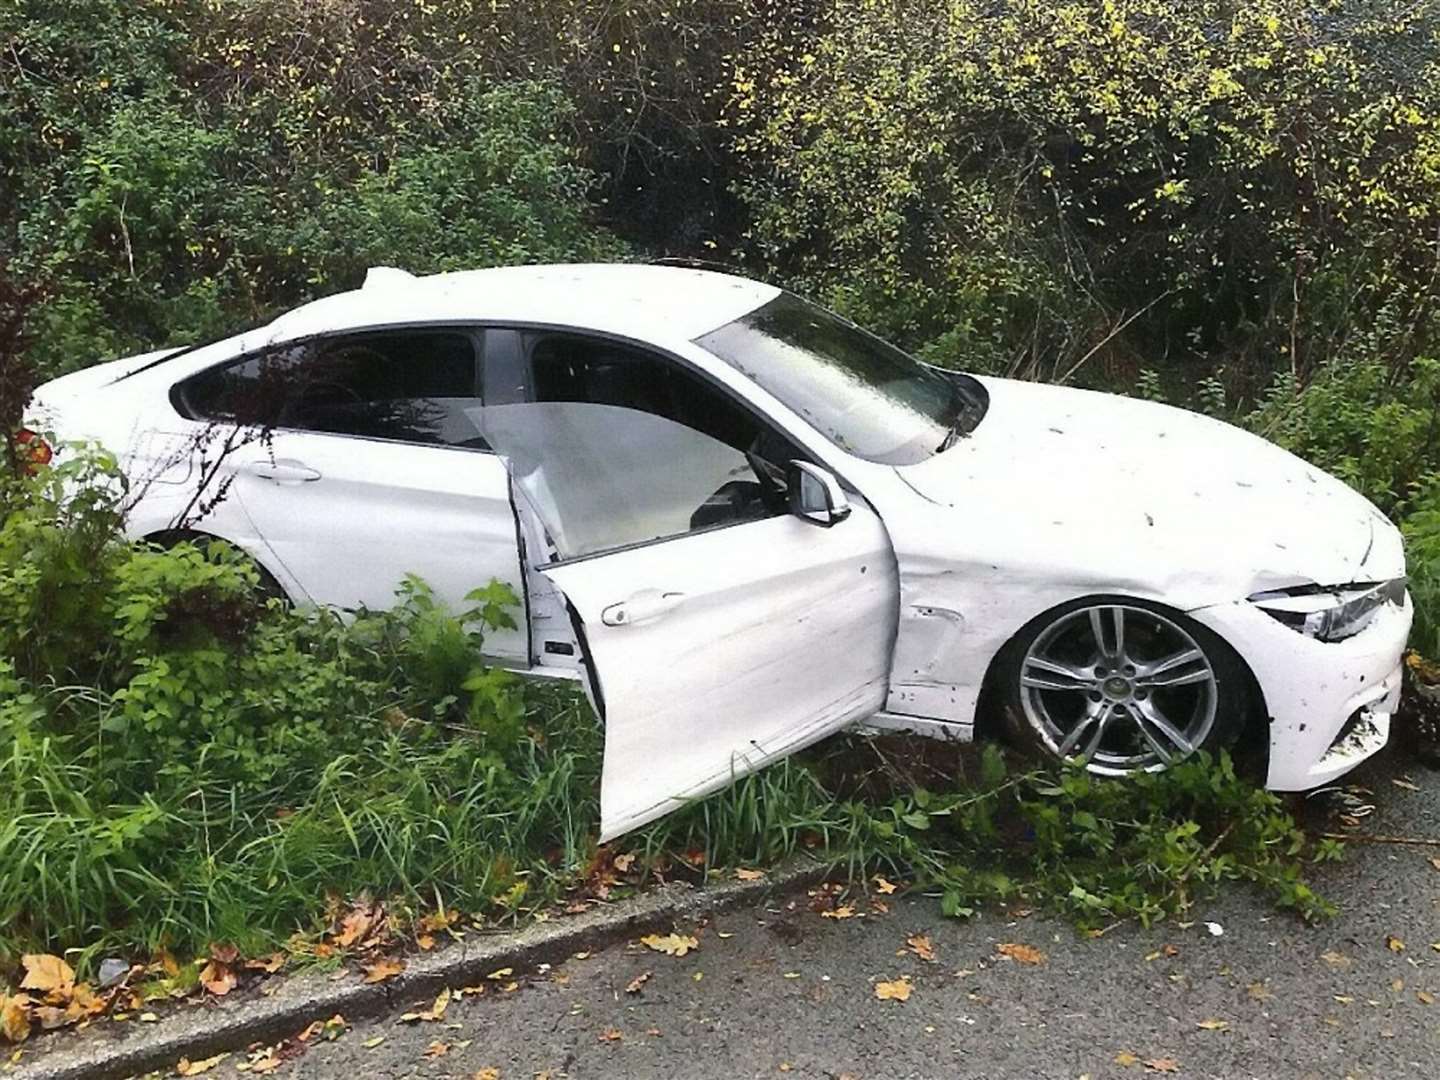 The stolen white BMW driven by Thomas Munday. Picture: Sussex Police/SWNS